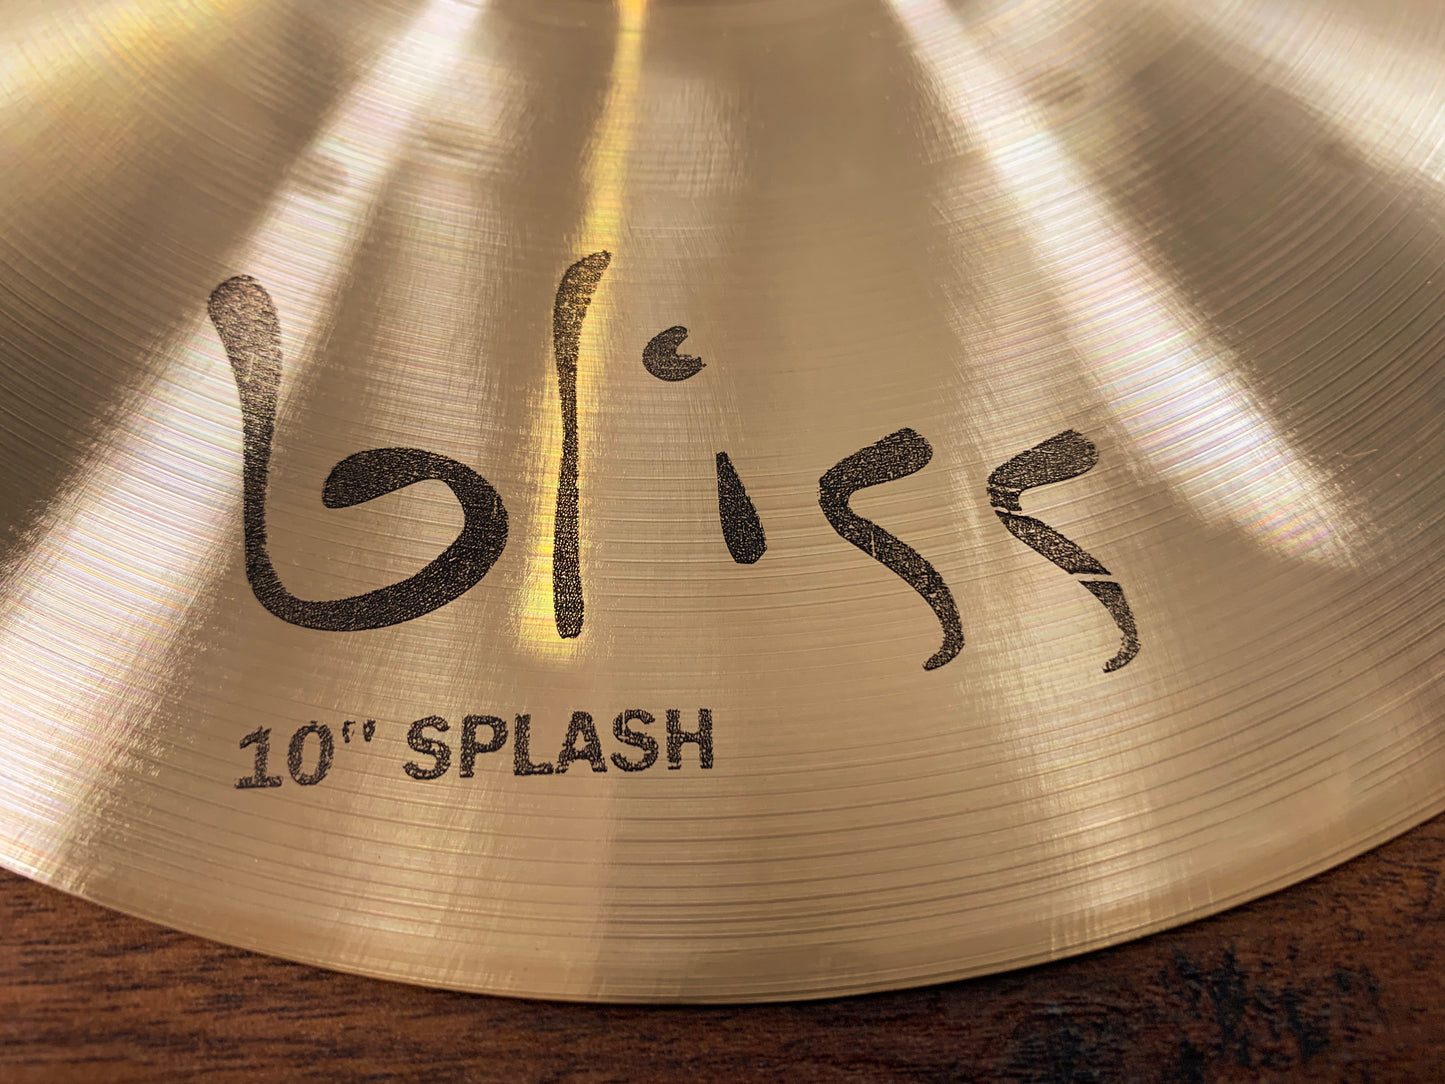 Dream Cymbals BSP10 Bliss Hand Forged & Hammered 10" Splash Cymbal Demo